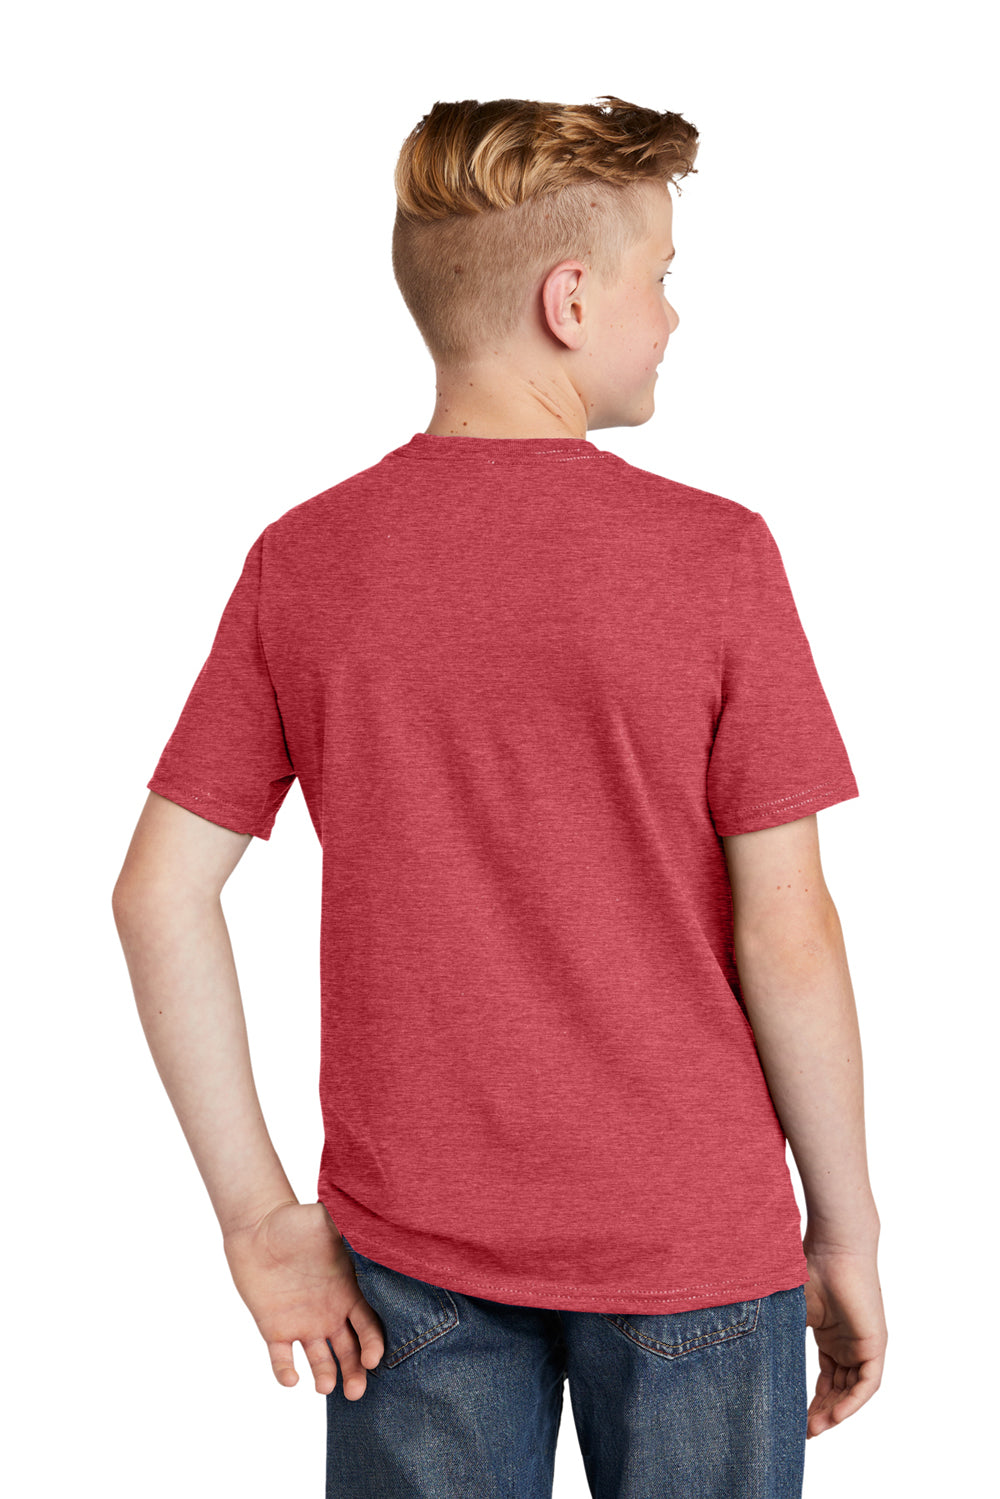 District DT6000Y Youth Very Important Short Sleeve Crewneck T-Shirt Heather Red Back